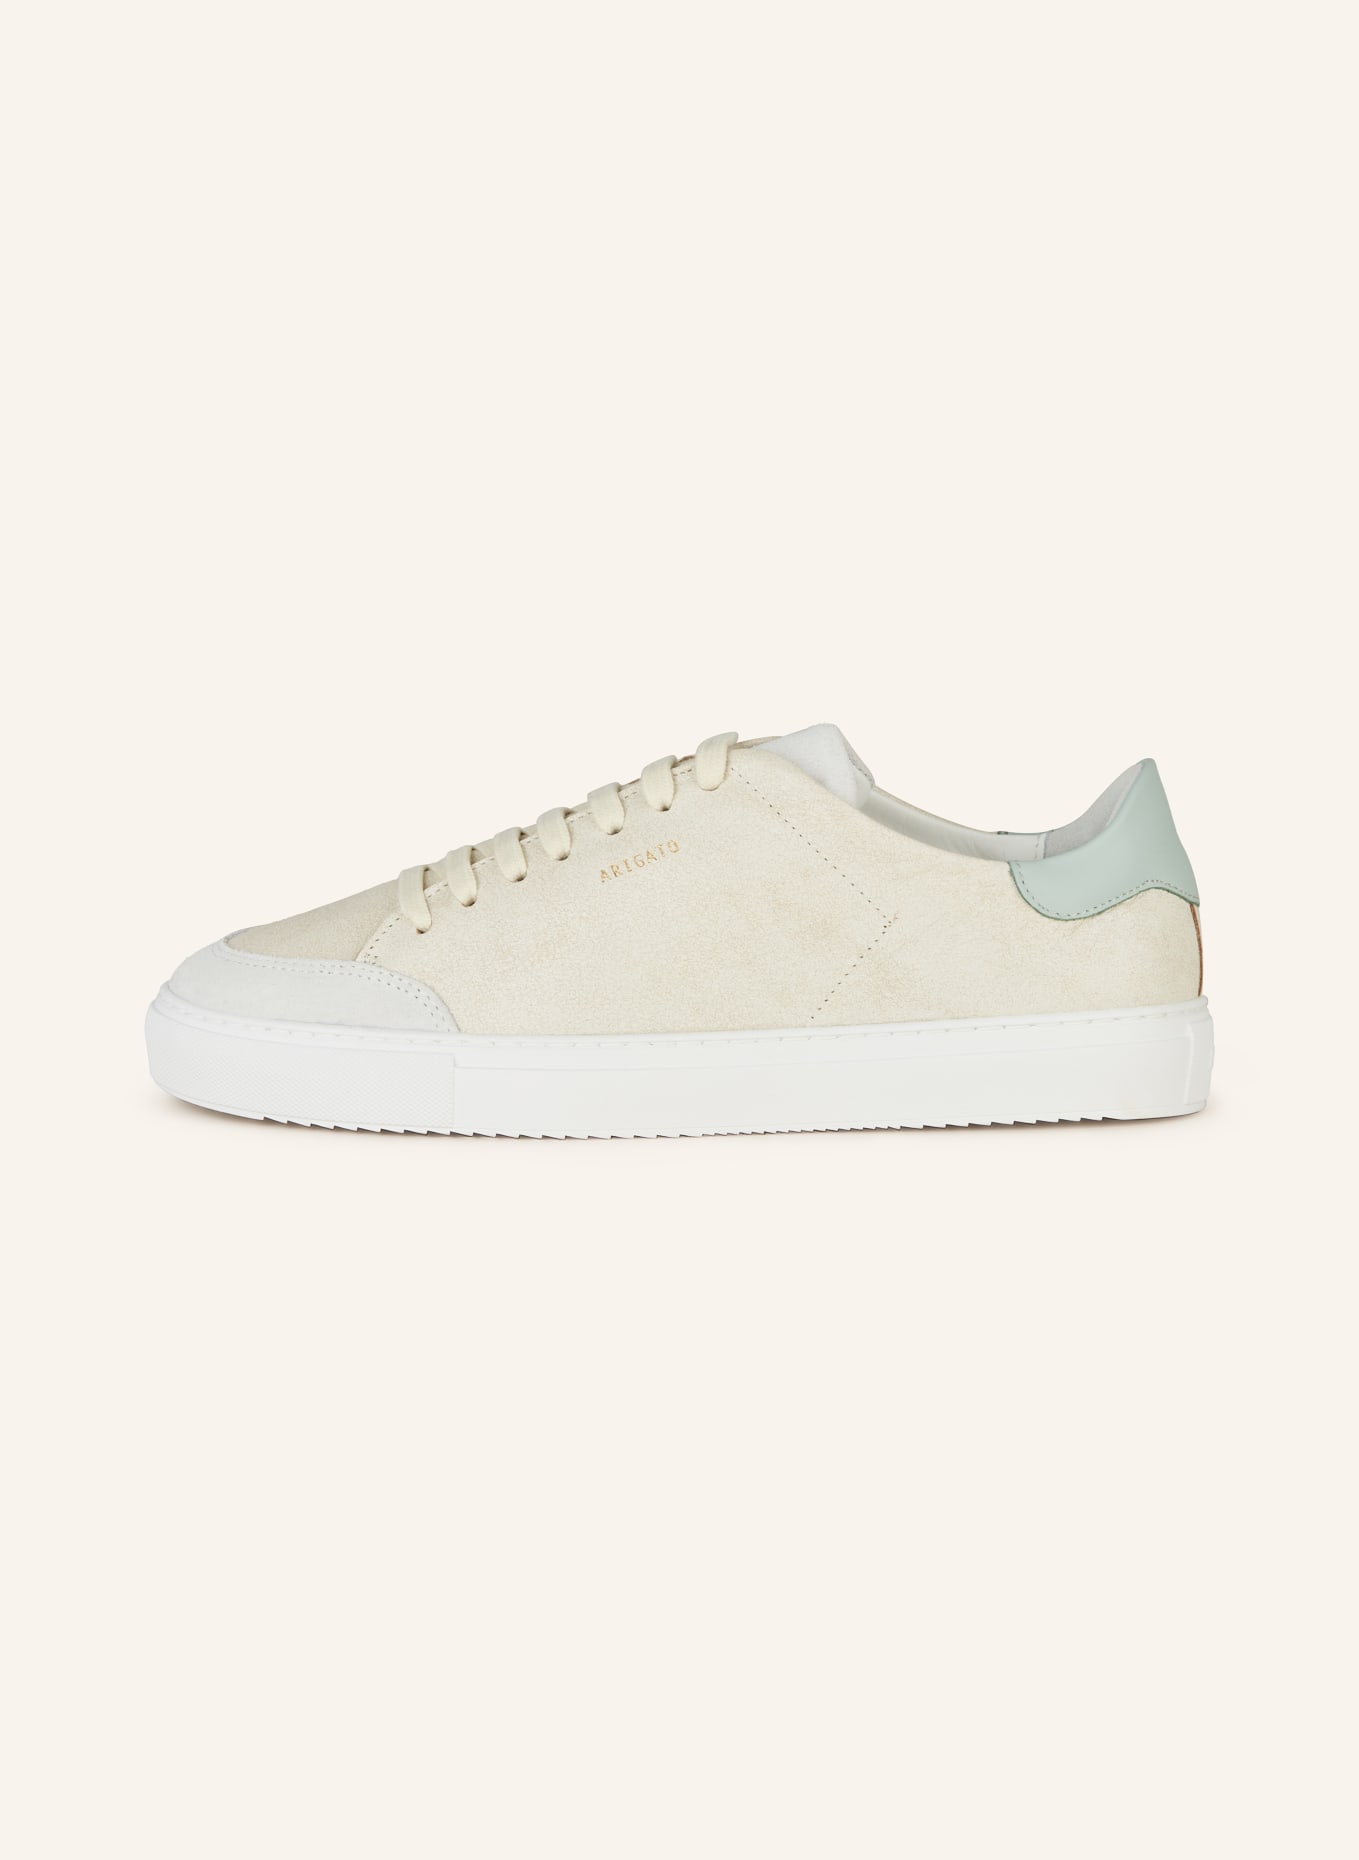 AXEL ARIGATO Sneakers CLEAN, Color: BEIGE/ LIGHT GRAY (Image 4)